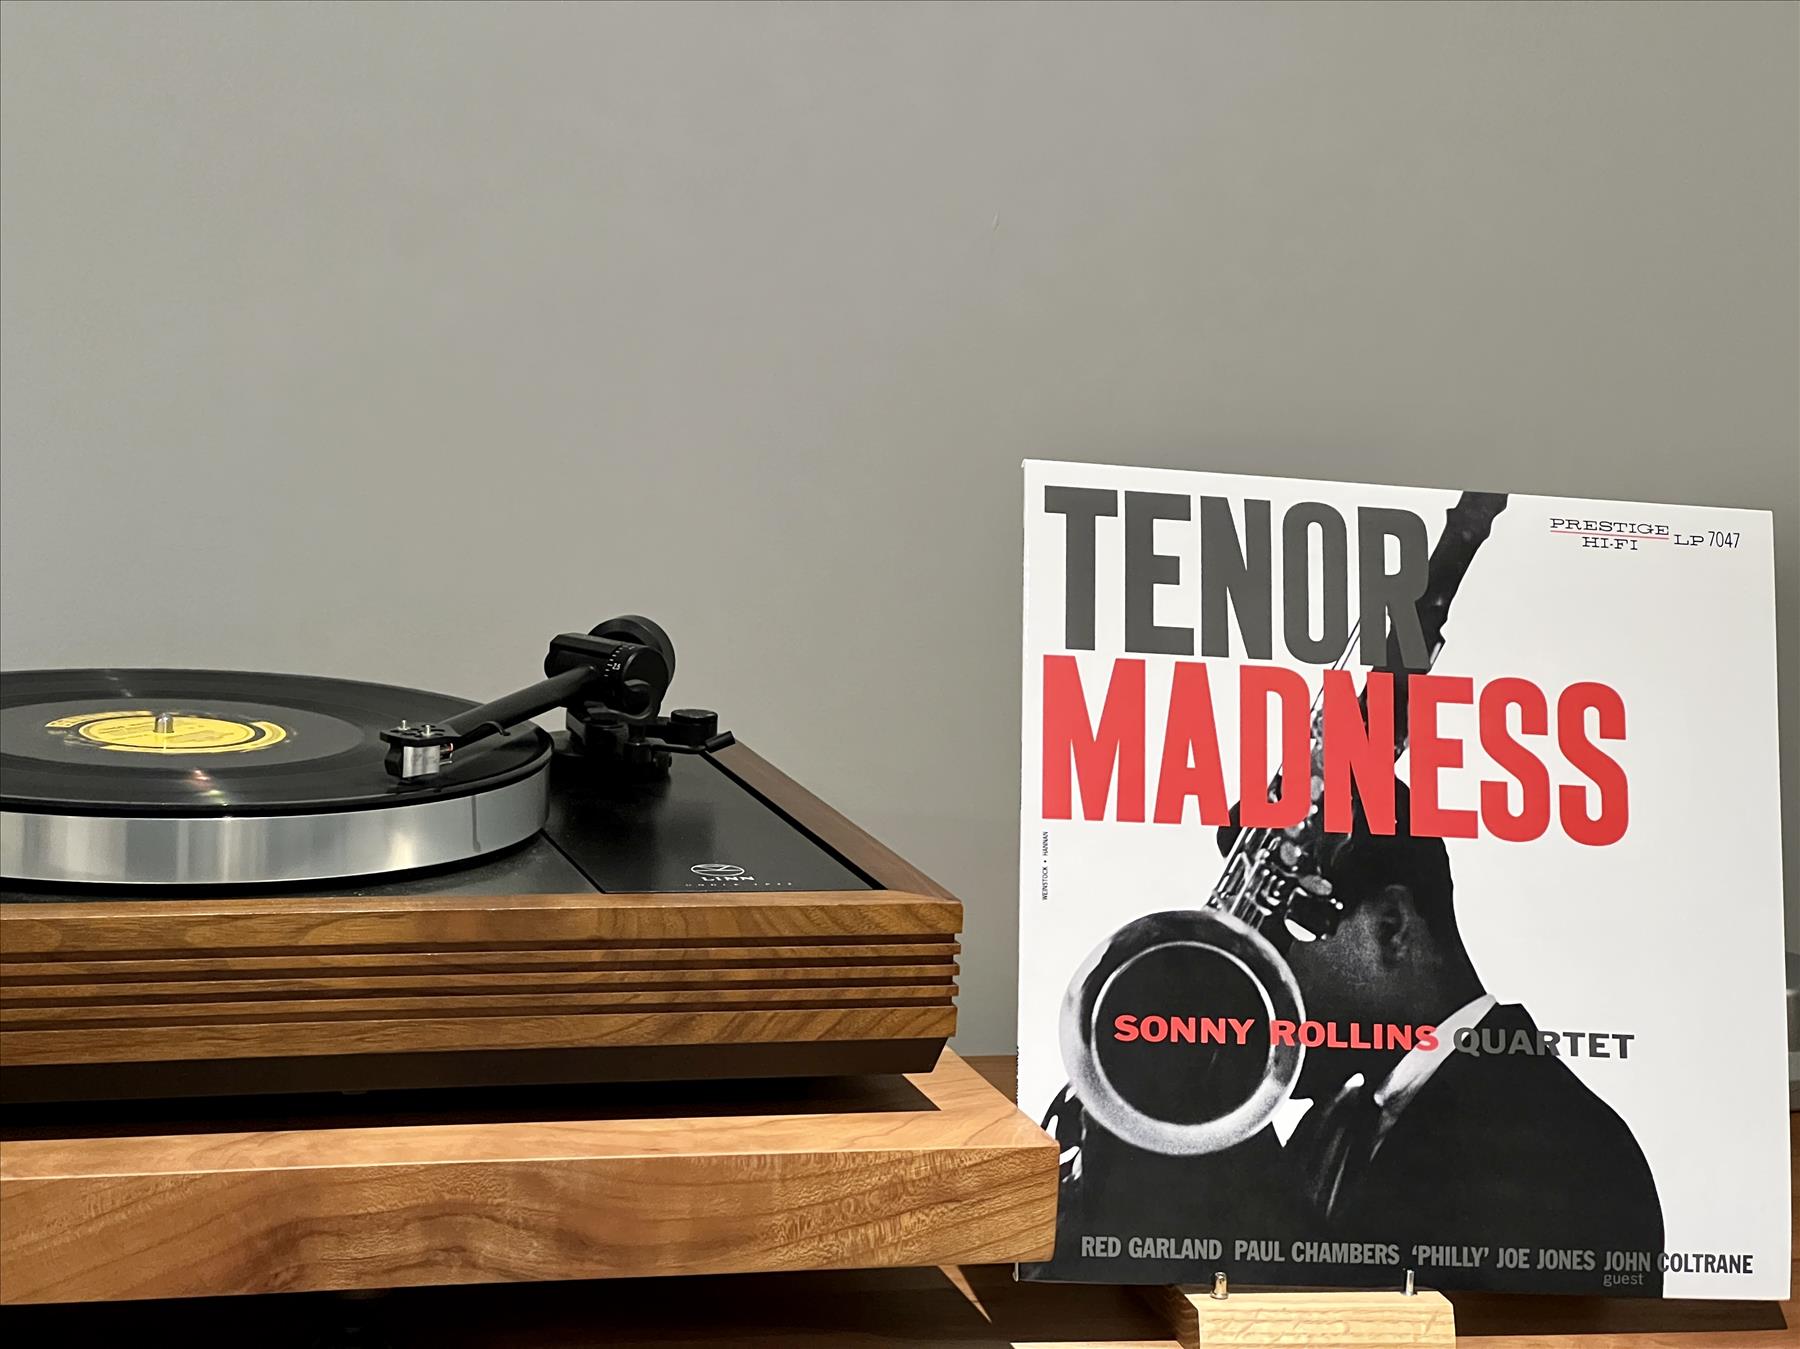 Tenor Madness: My kind of musical therapy in a troubled world